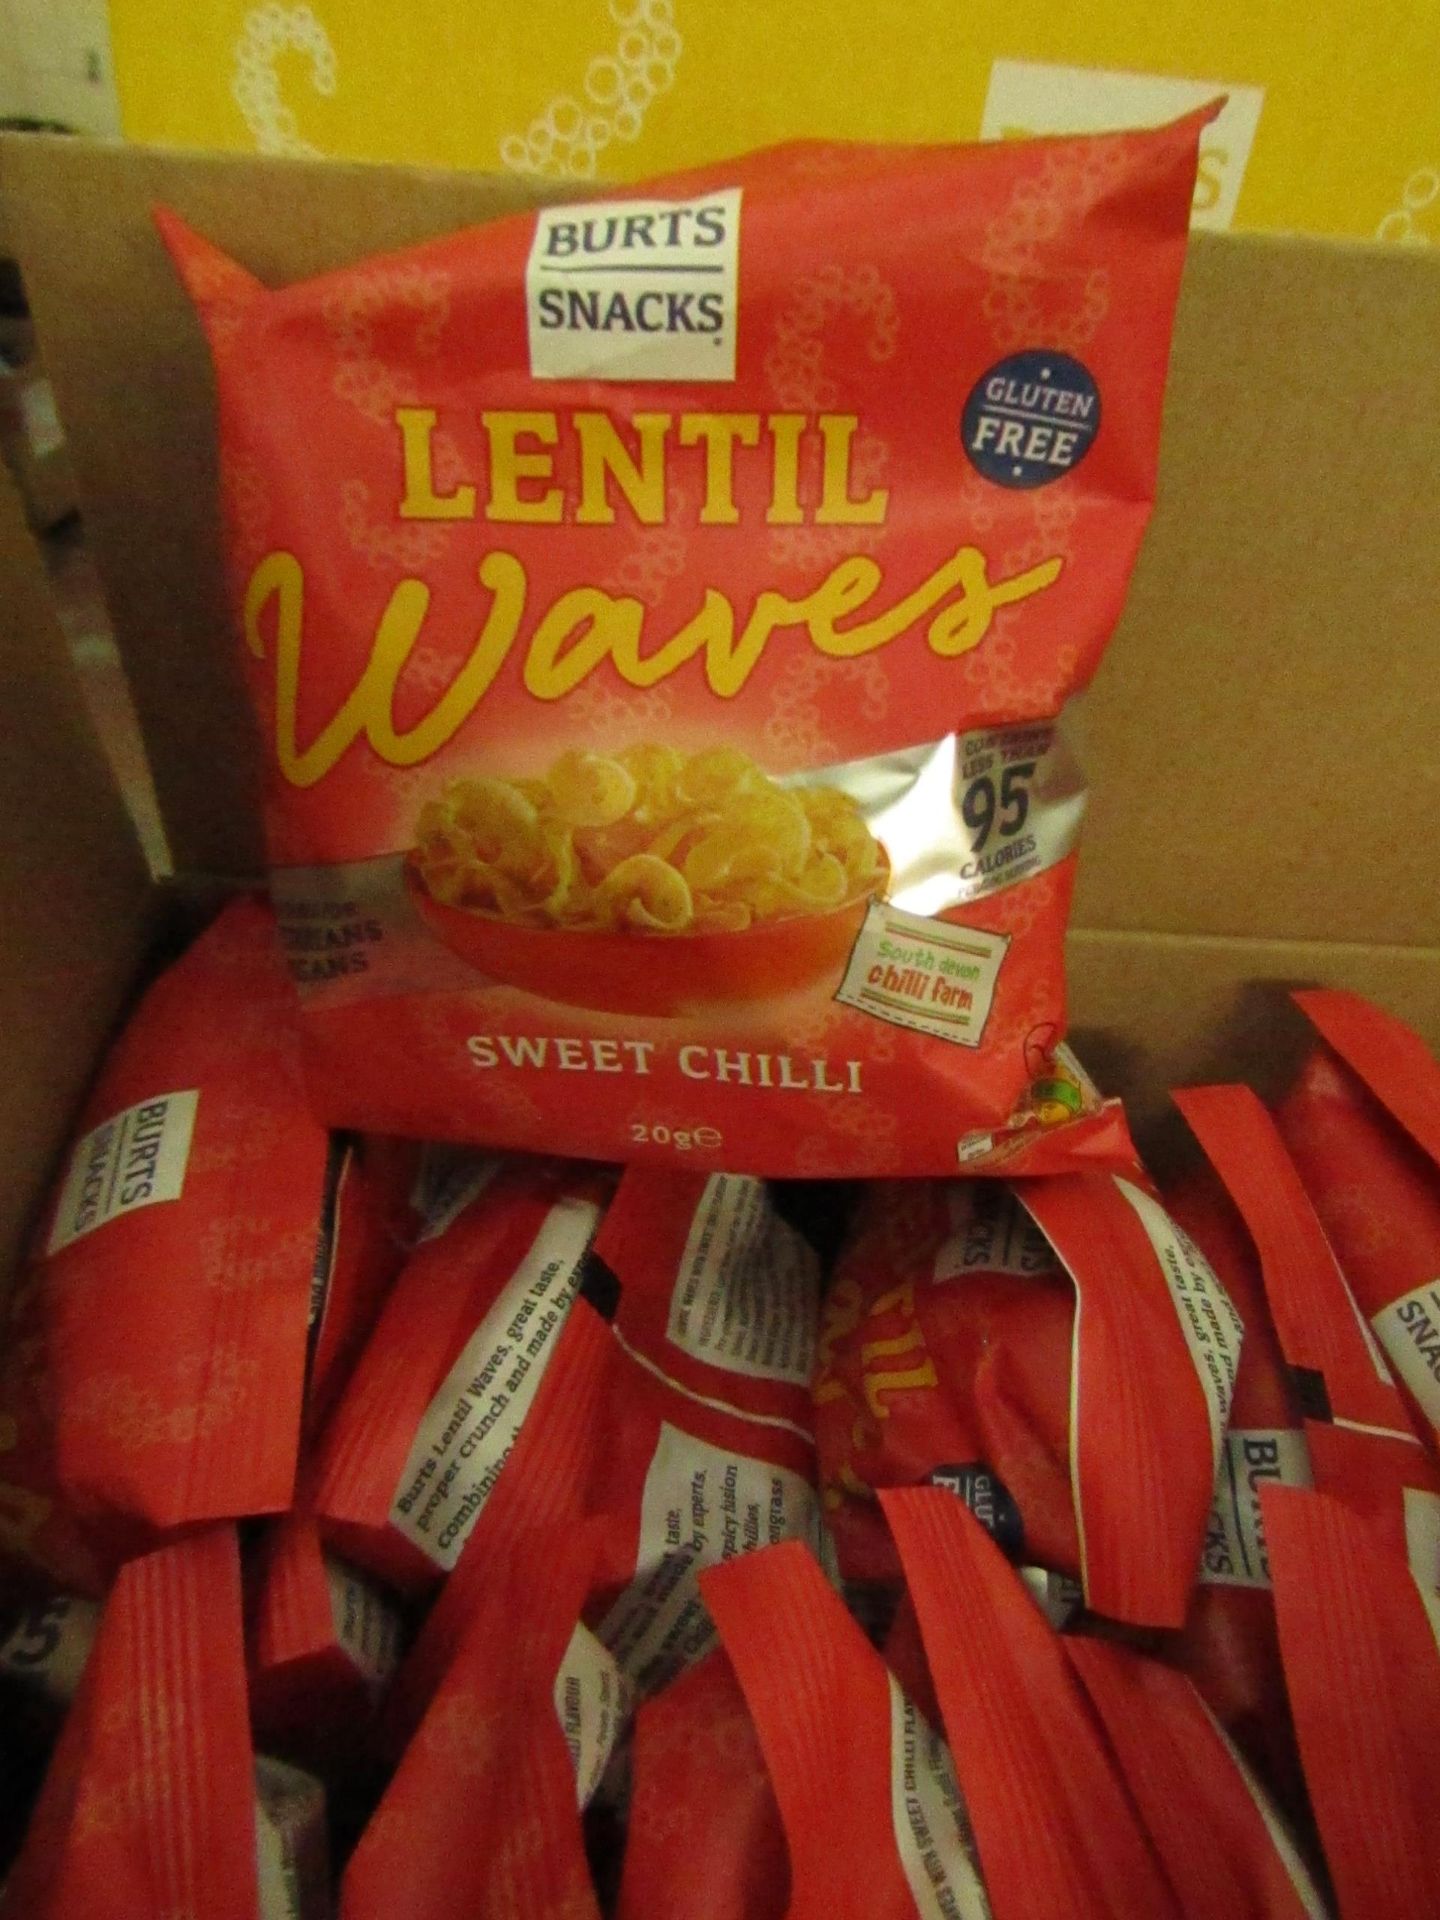 2x Boxes of 16x 20g Burts Snacks - Sweet Chilli Lentil Waves - Best before 10/02/2021 - New &